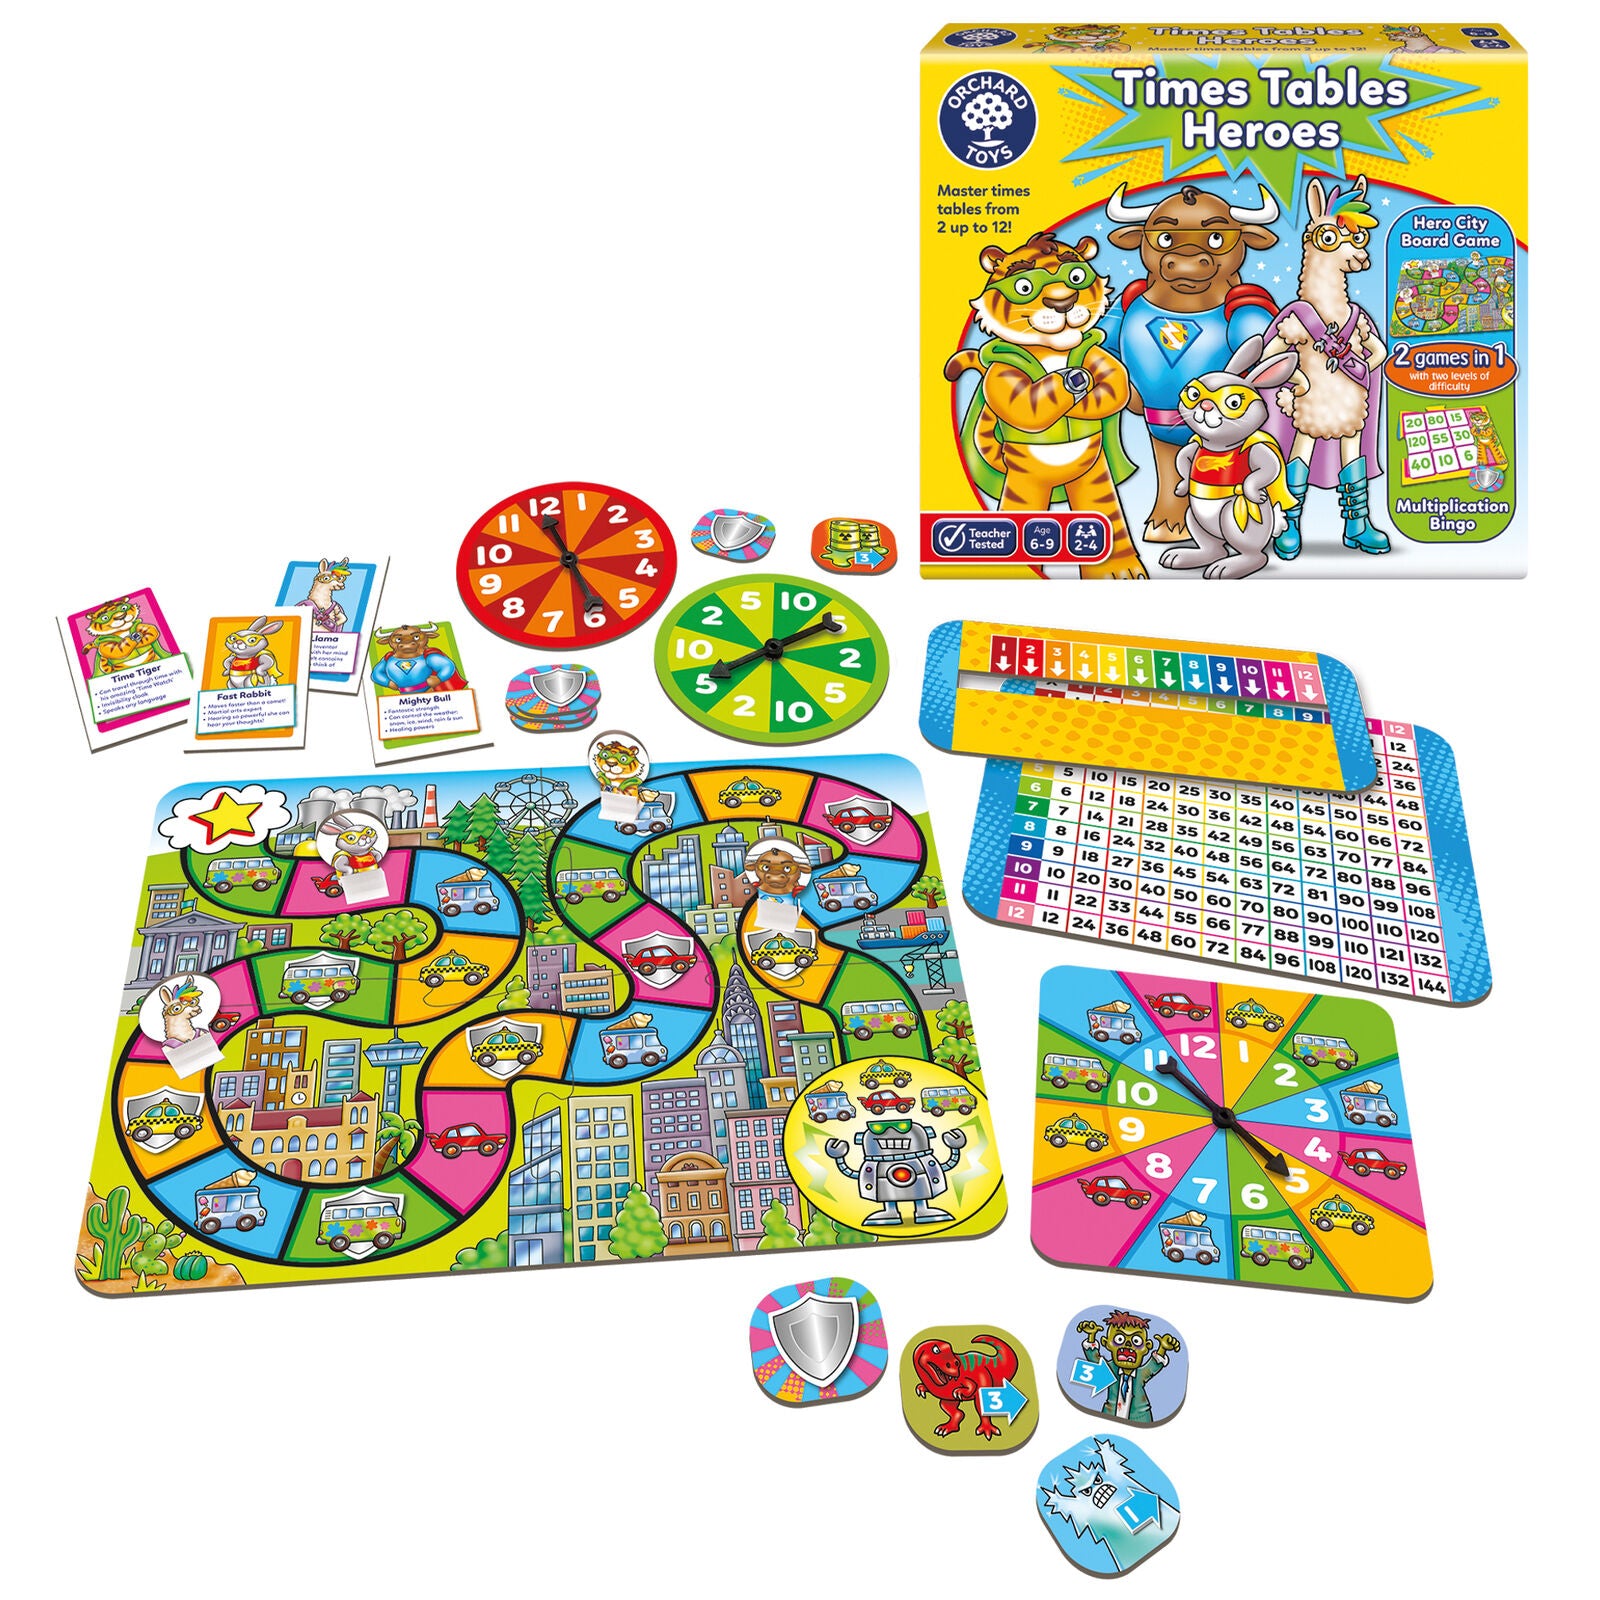 Orchard Toys 101 Times Tables Heroes Board Game Multiplication Bingo Family Chil